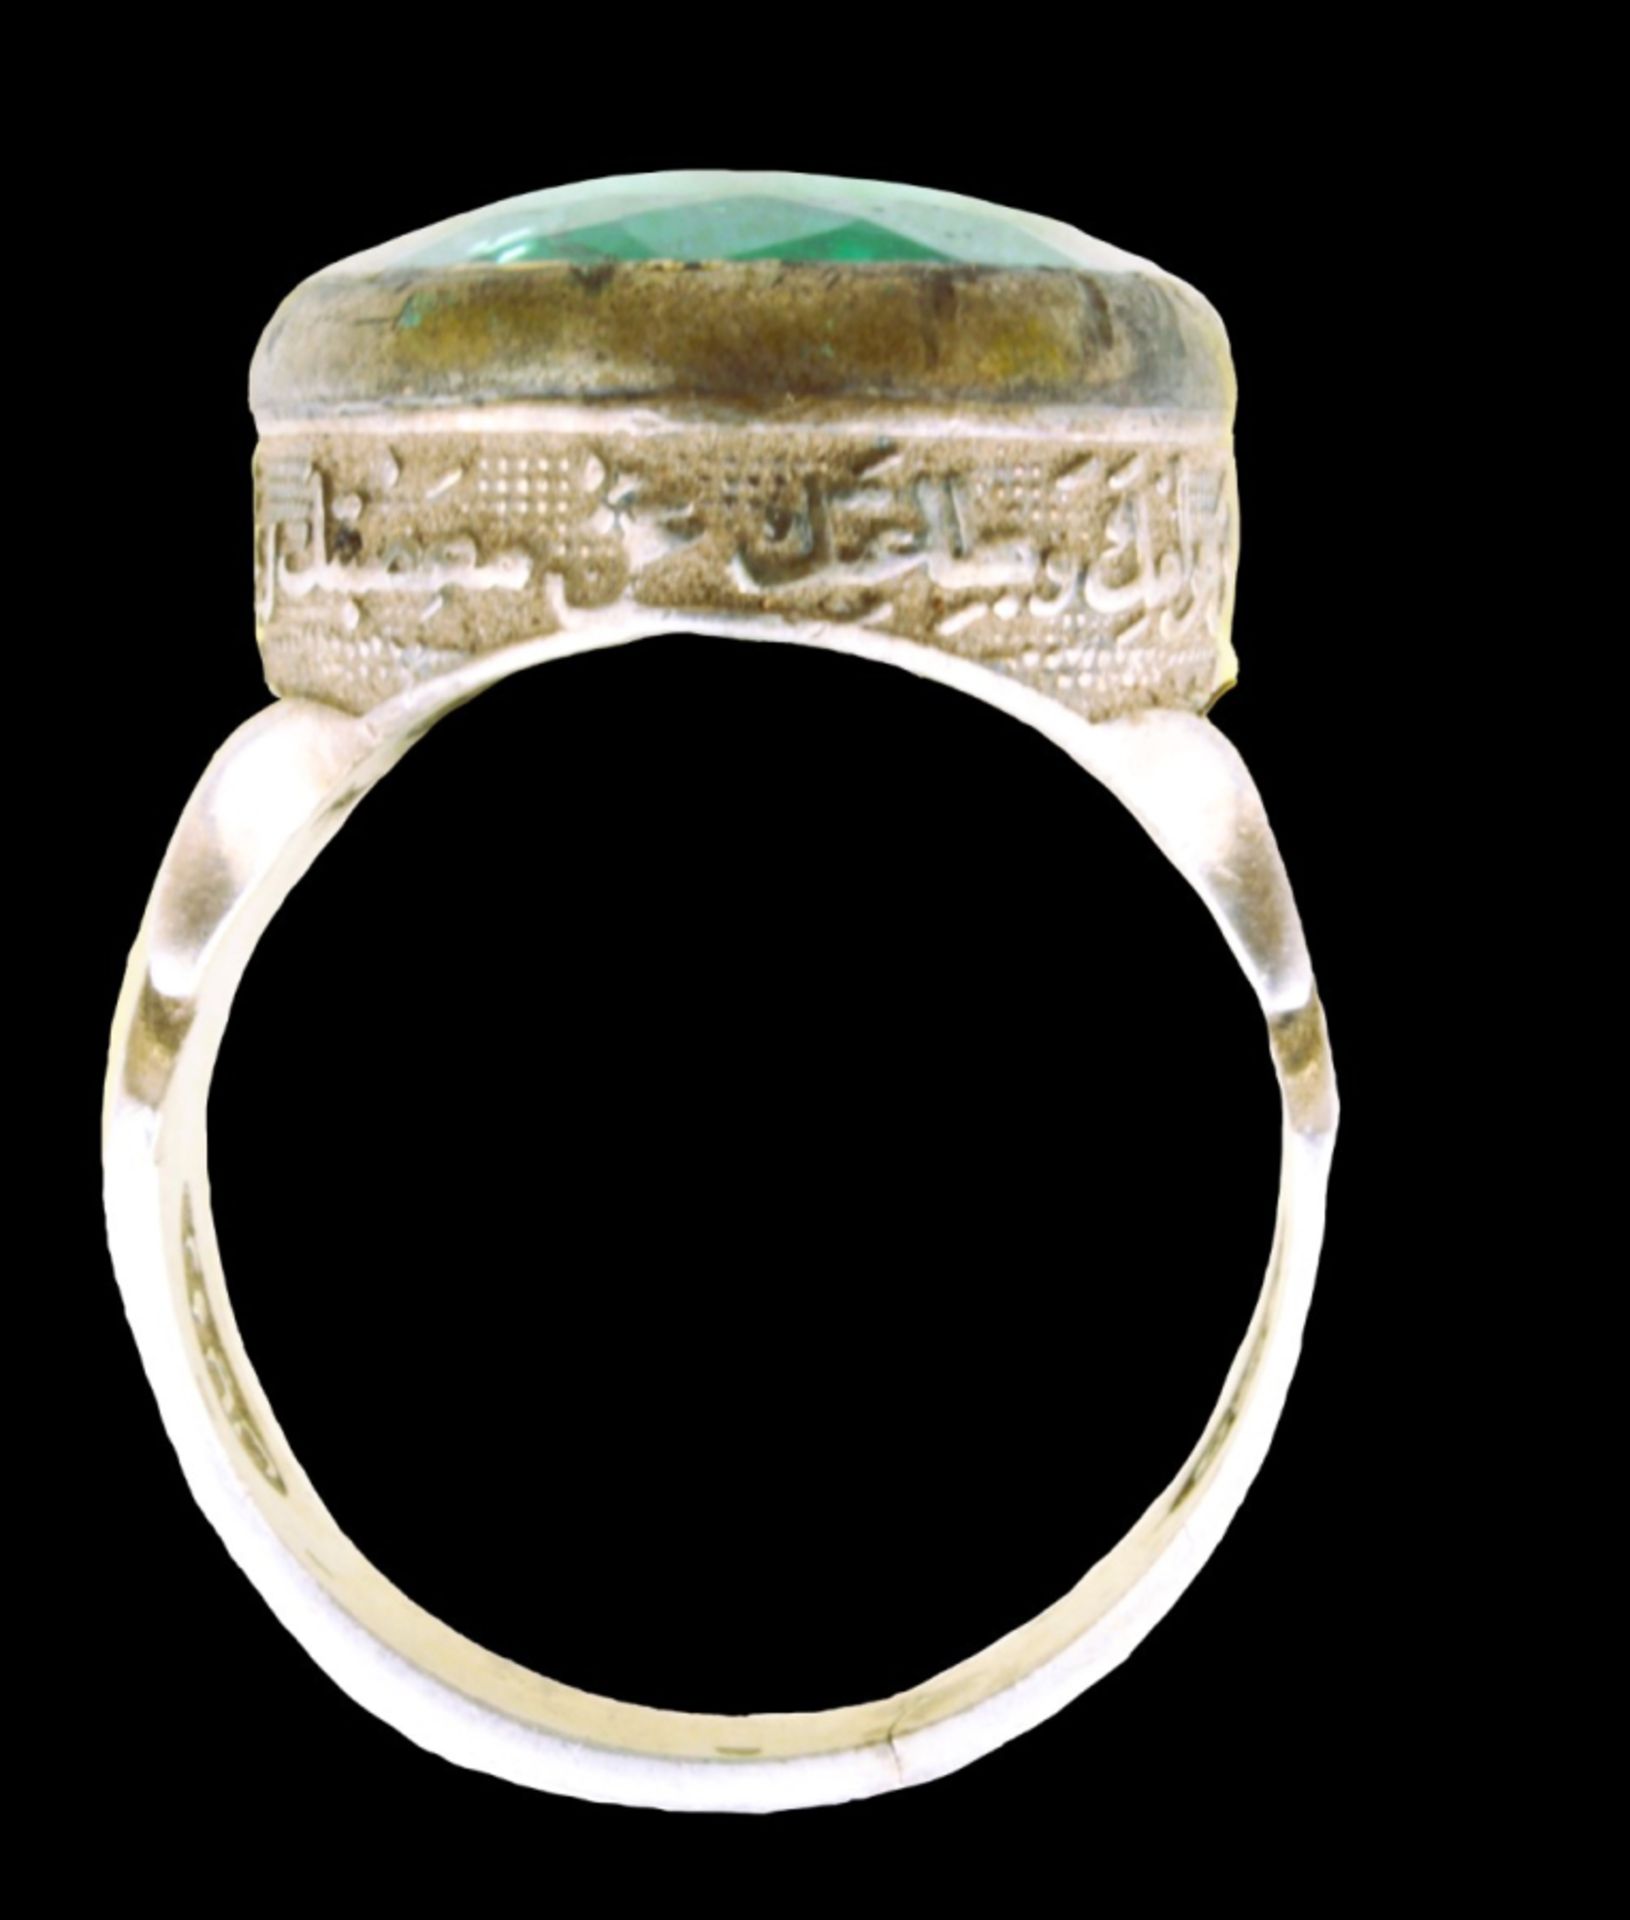 Silver ring with green stone engraved with islamic script - Image 5 of 7